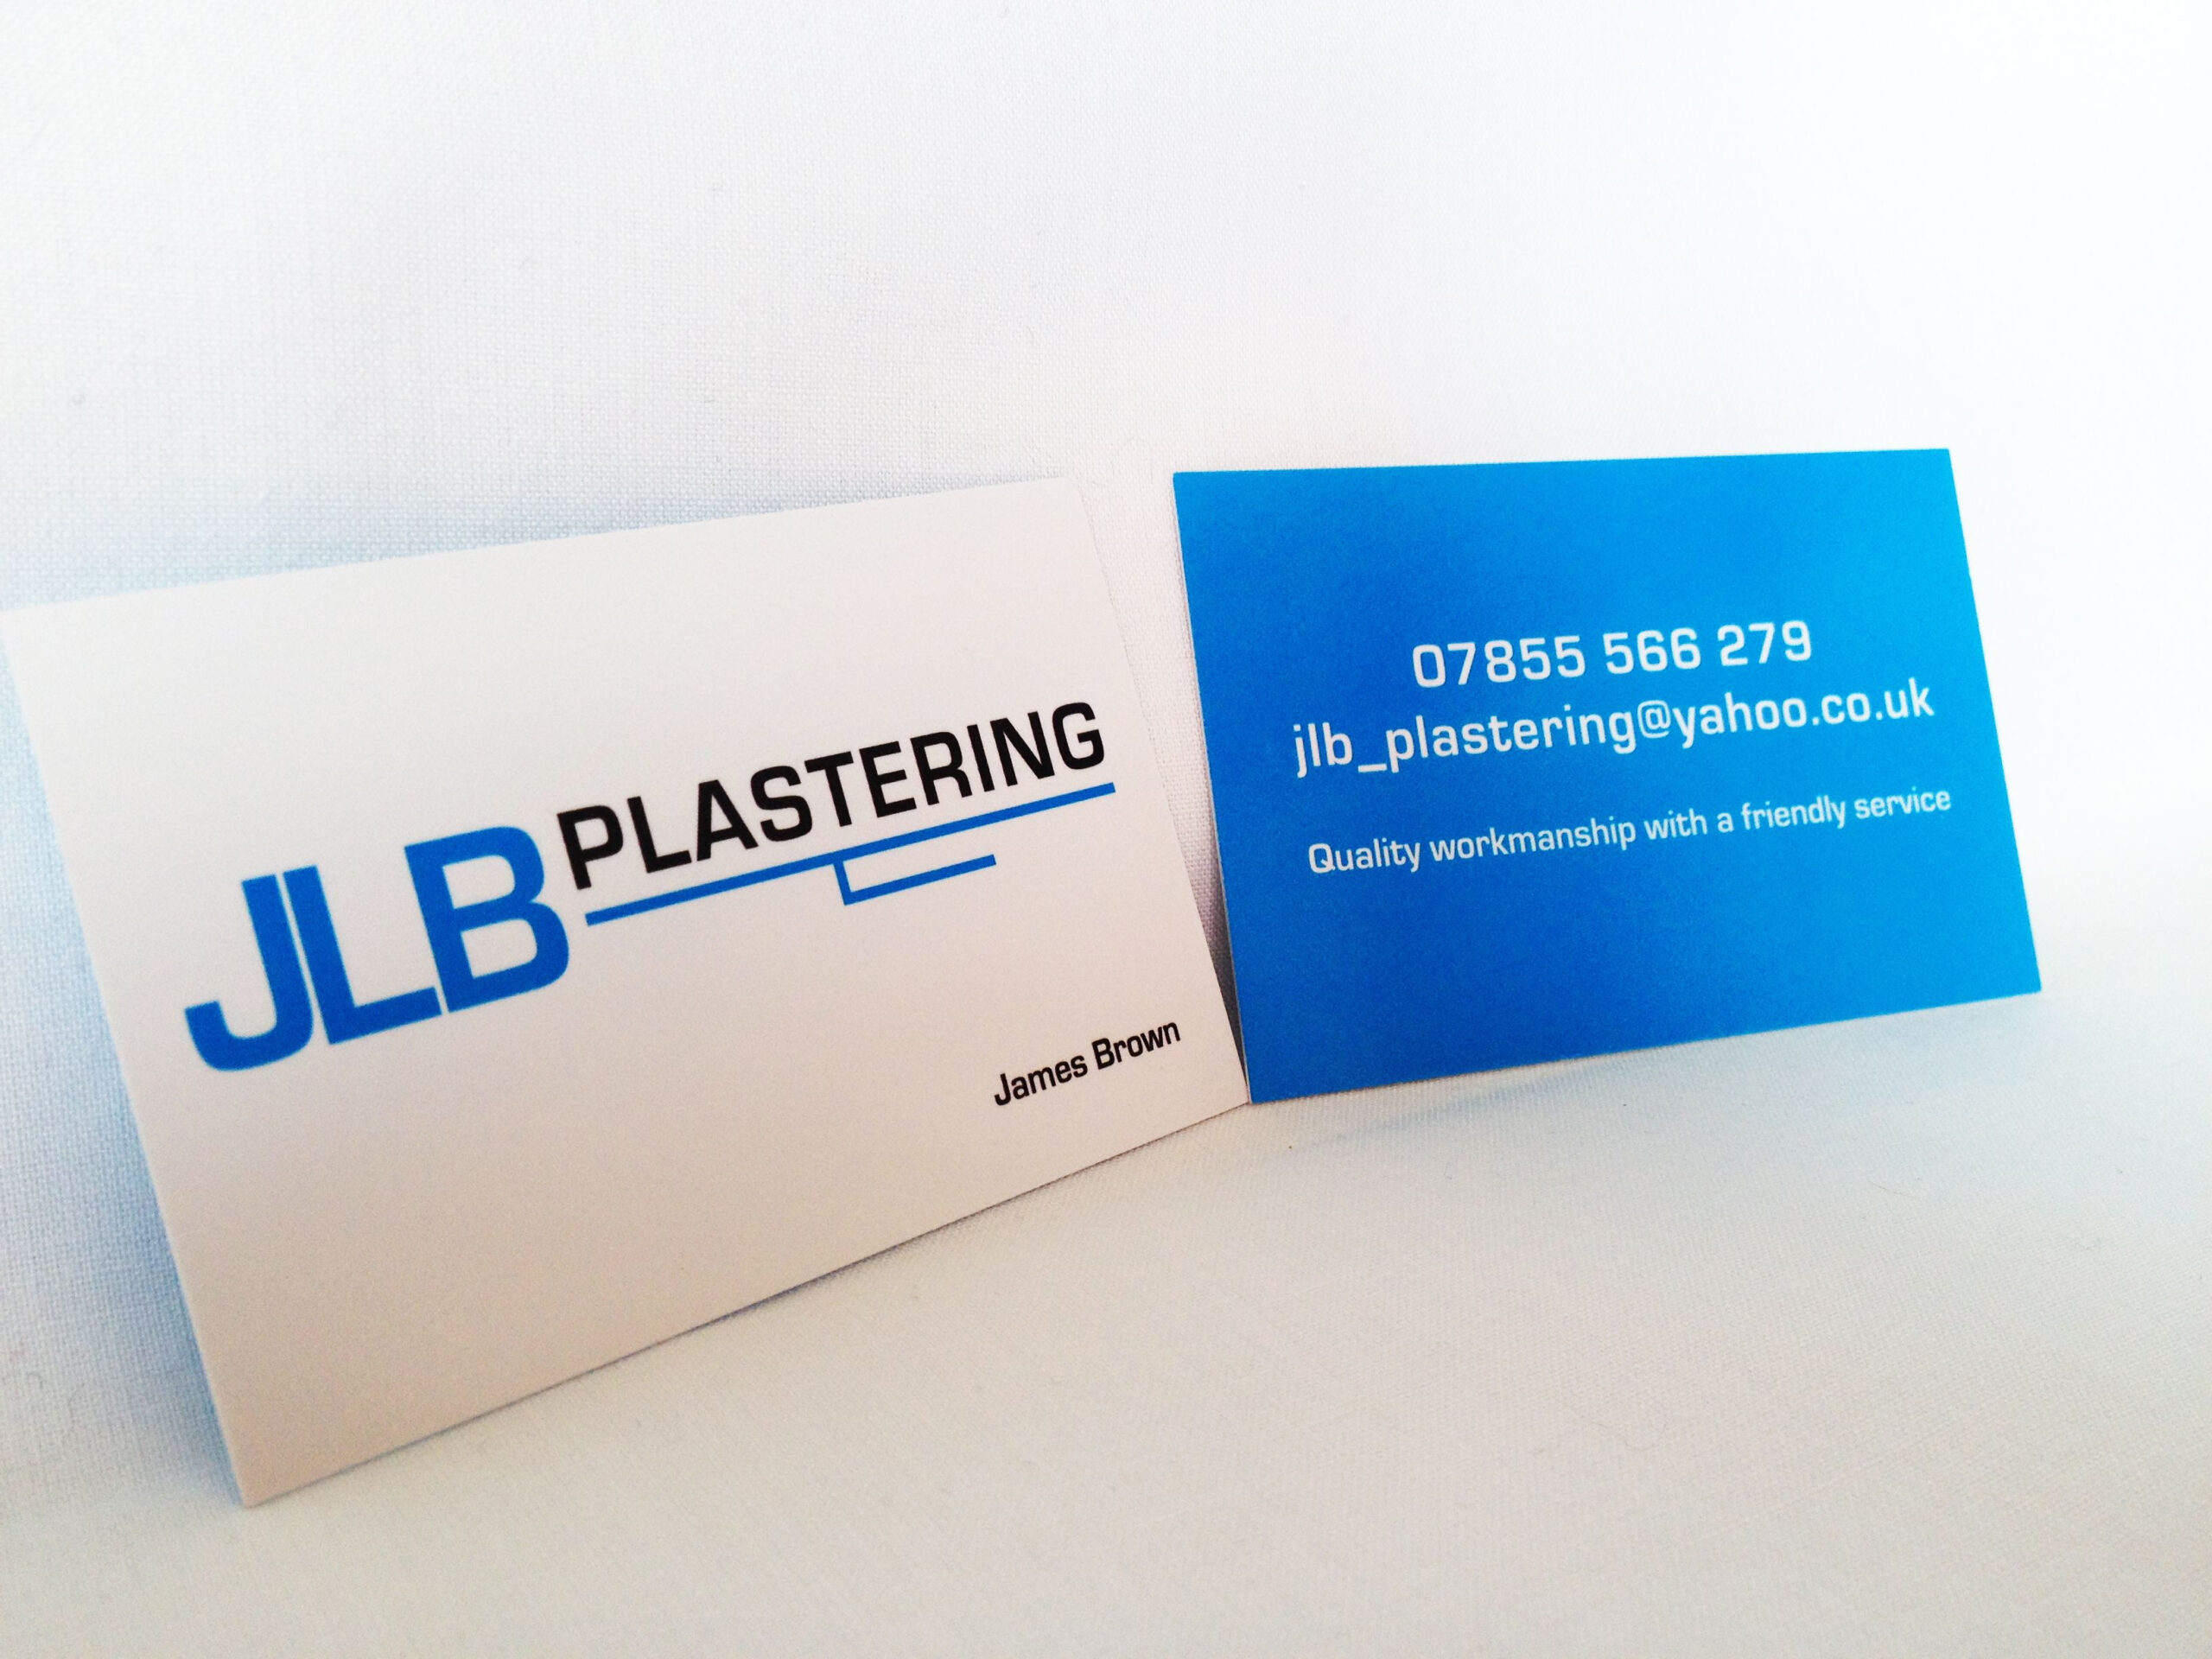 New Jlb Plastering Business Cards And Logo Design | Logos For Plastering Business Cards Templates